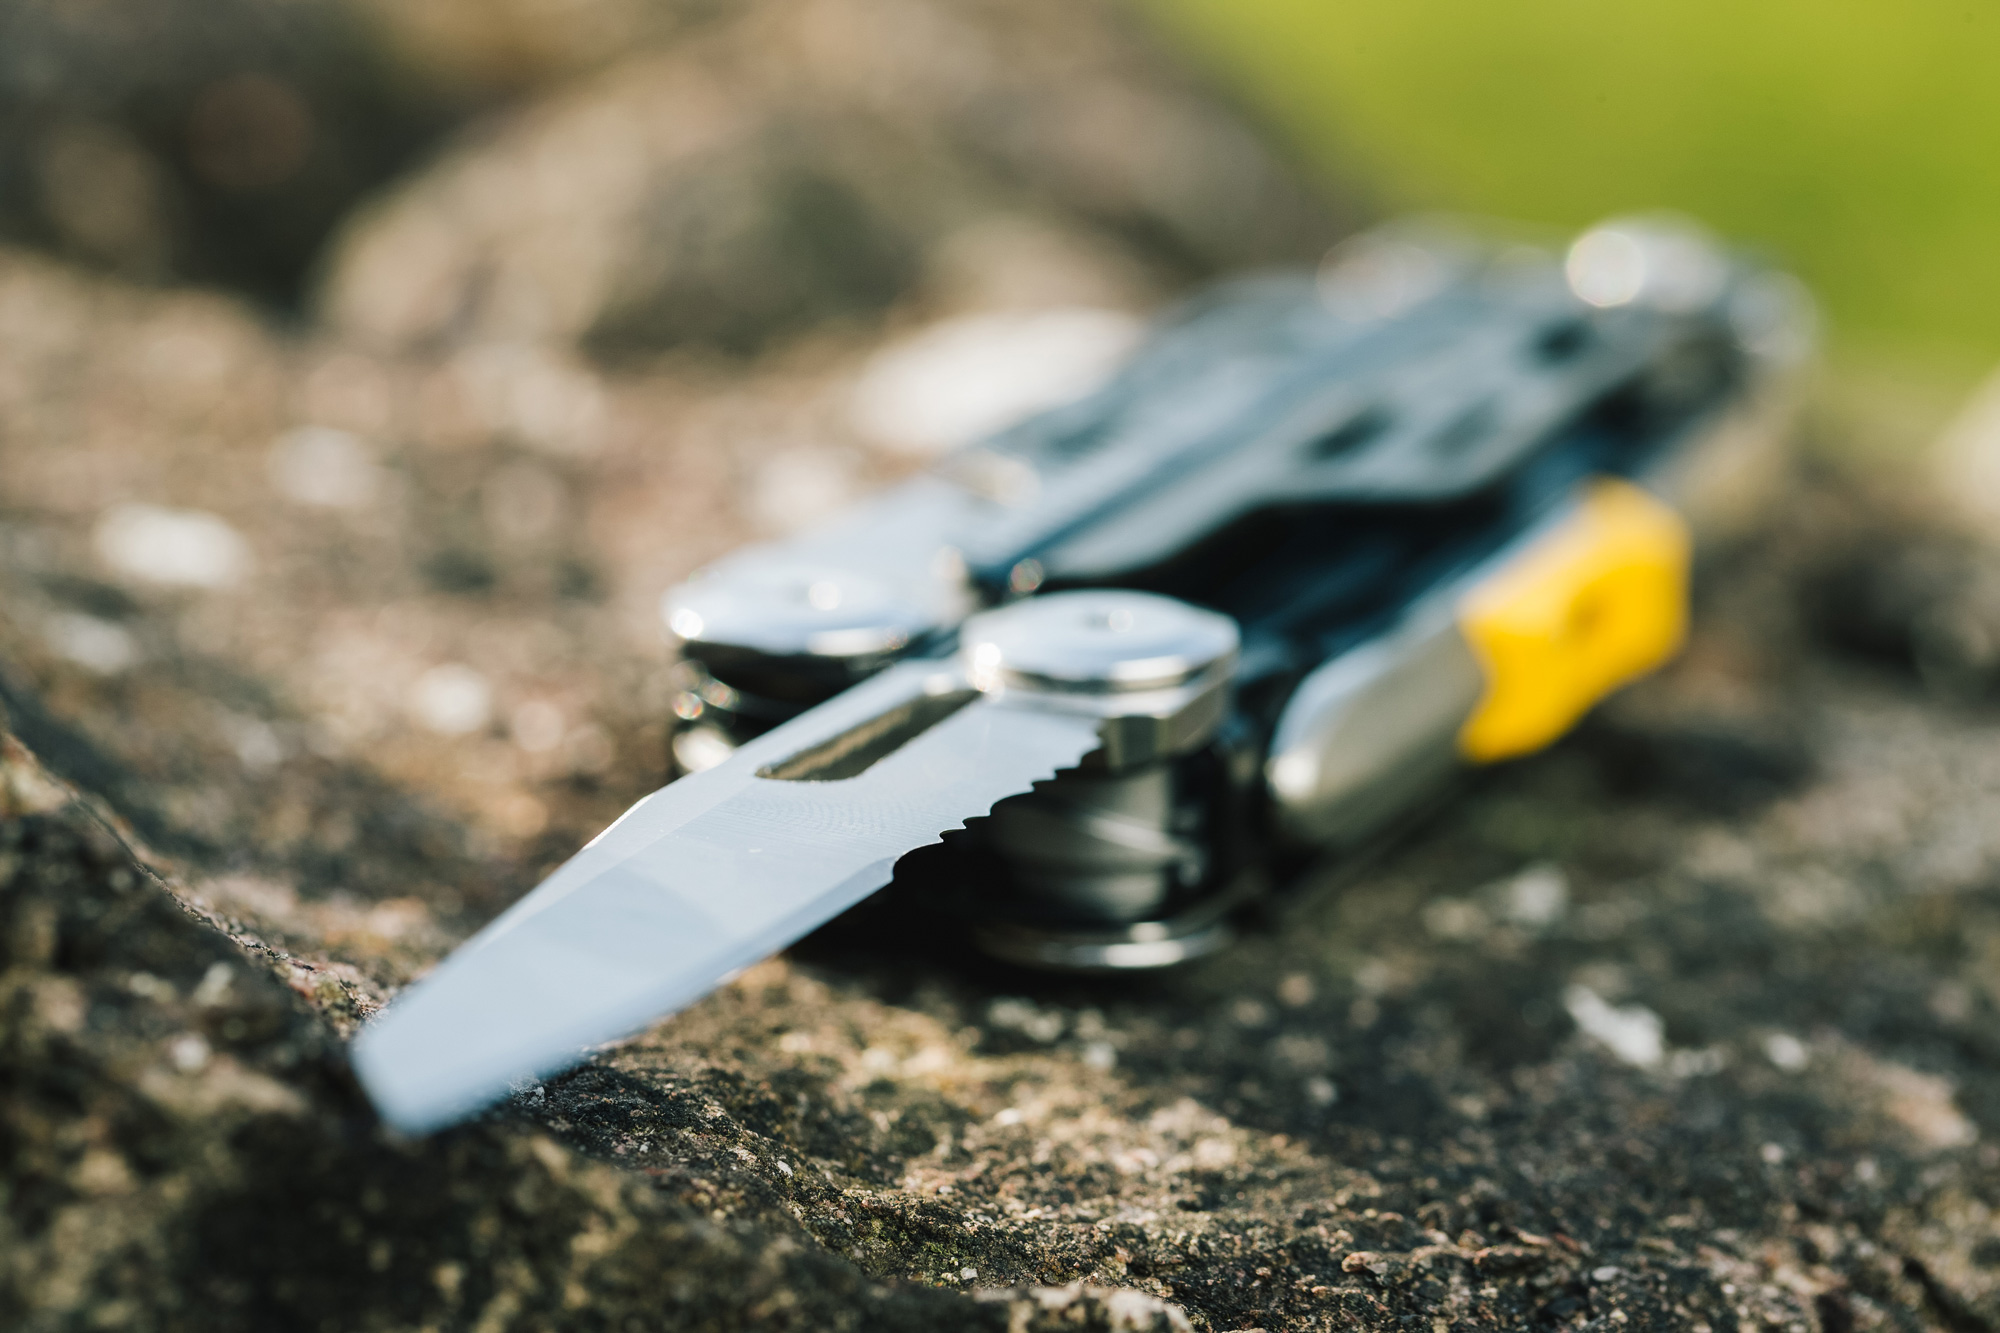 Leatherman Signal Multitool review